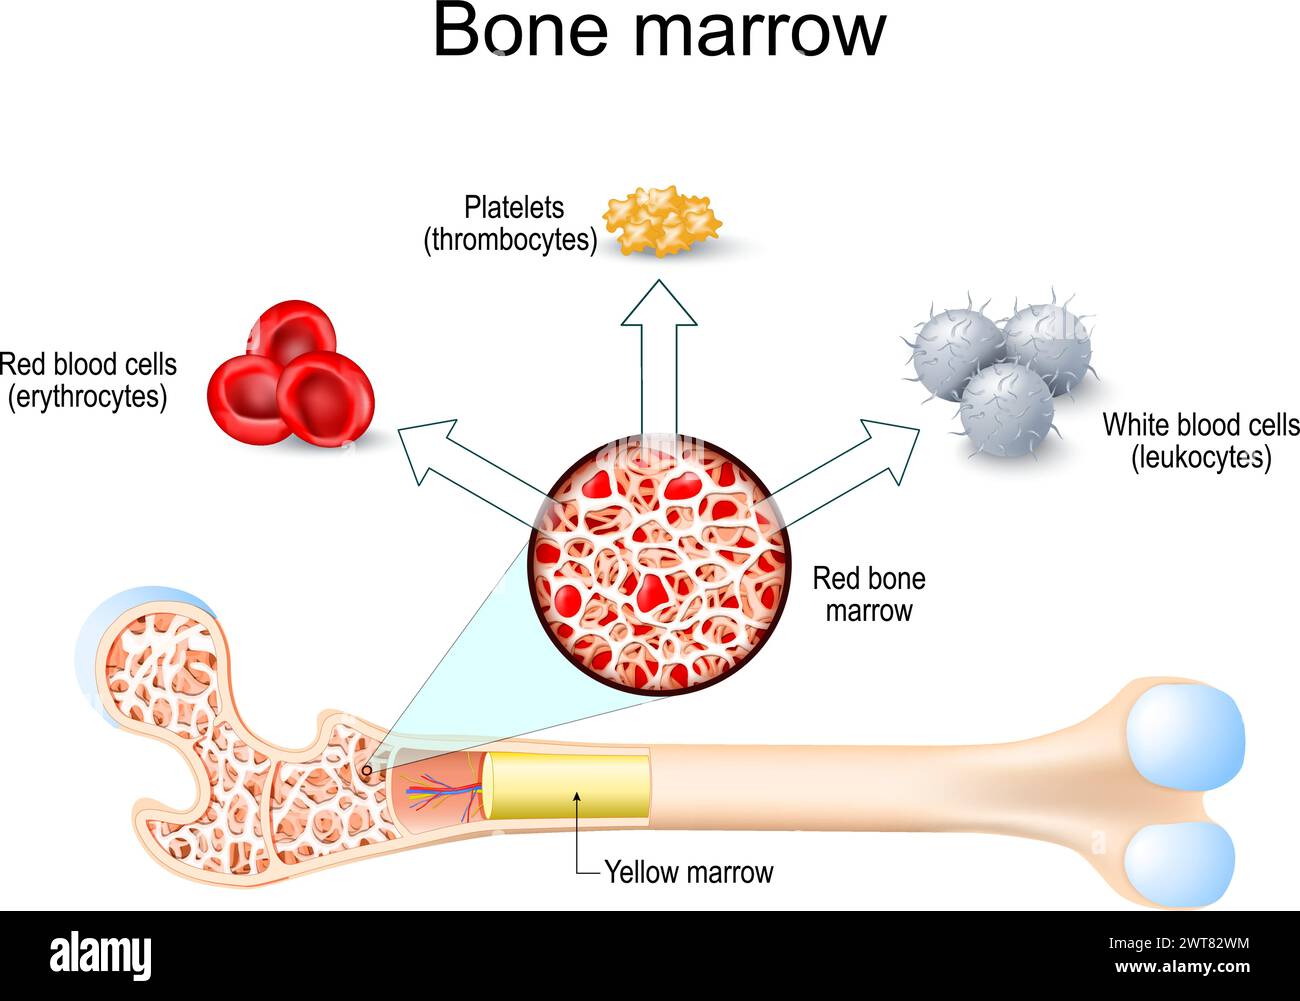 Red bone marrow and Yellow marrow. Hematopoiesis. Platelets thrombocytes, White blood cells or leukocytes, Red blood cells or erythrocytes. Vector ill Stock Vector